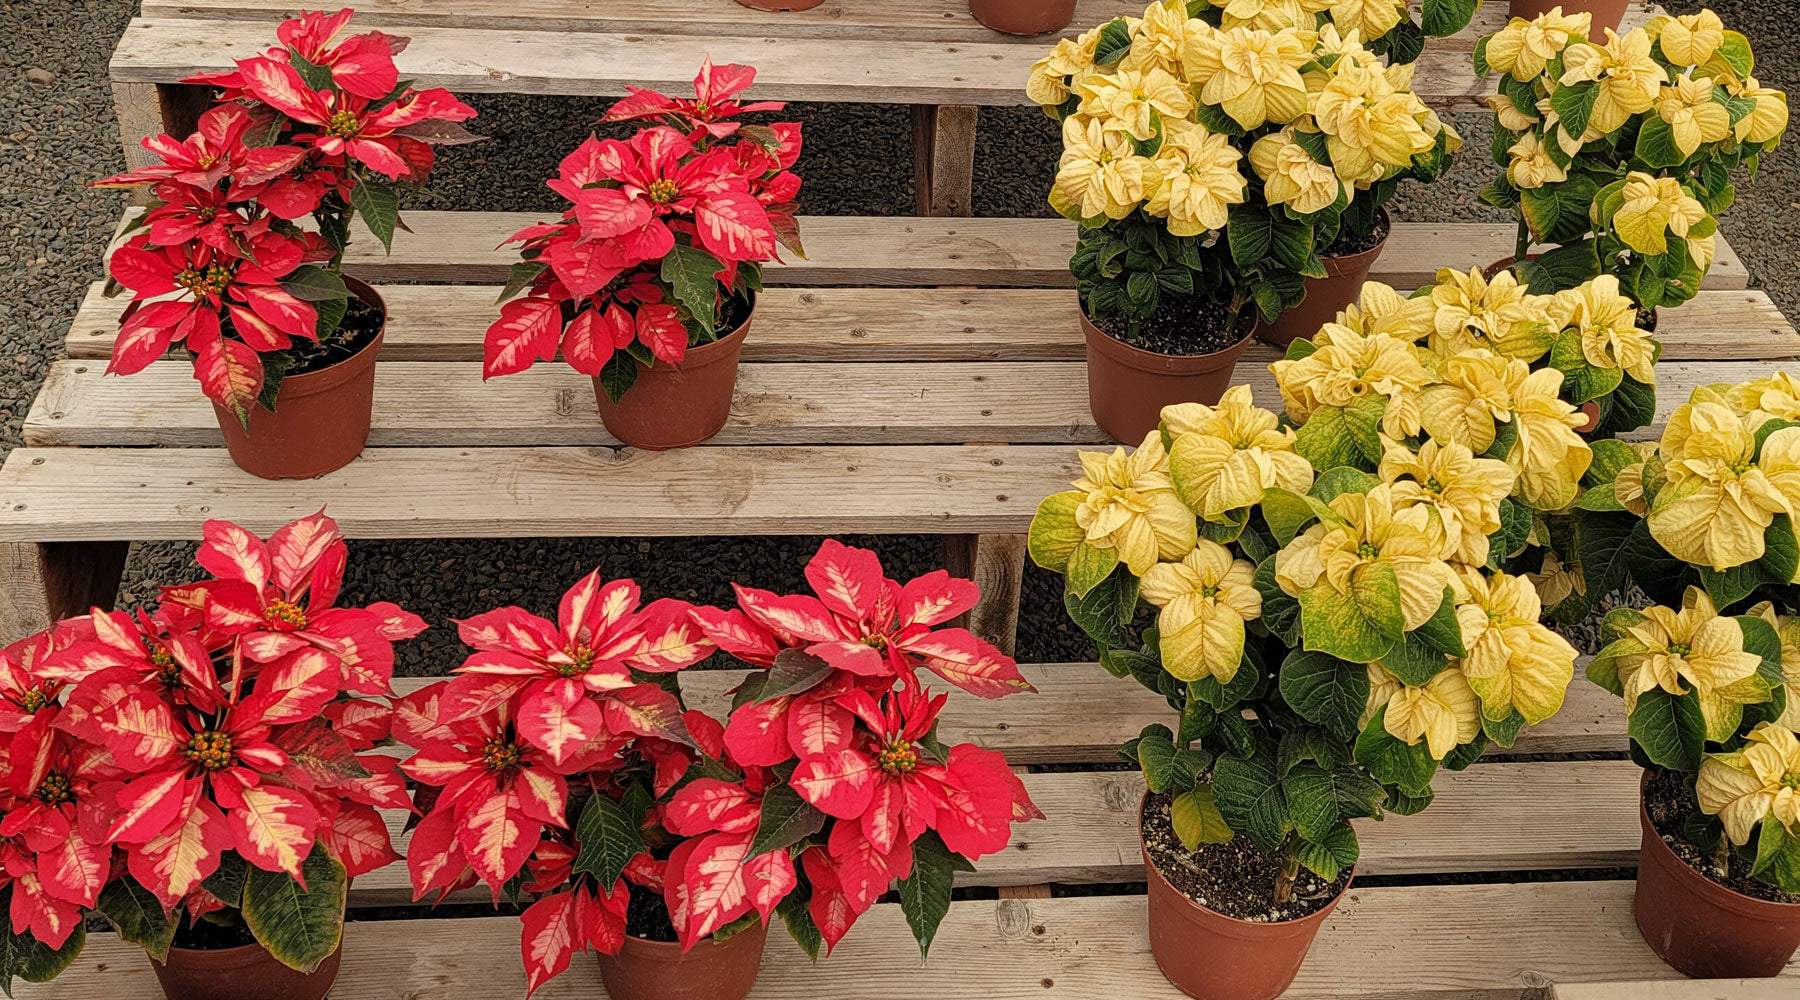 Festive Delight: Your Guide to Holiday Plants